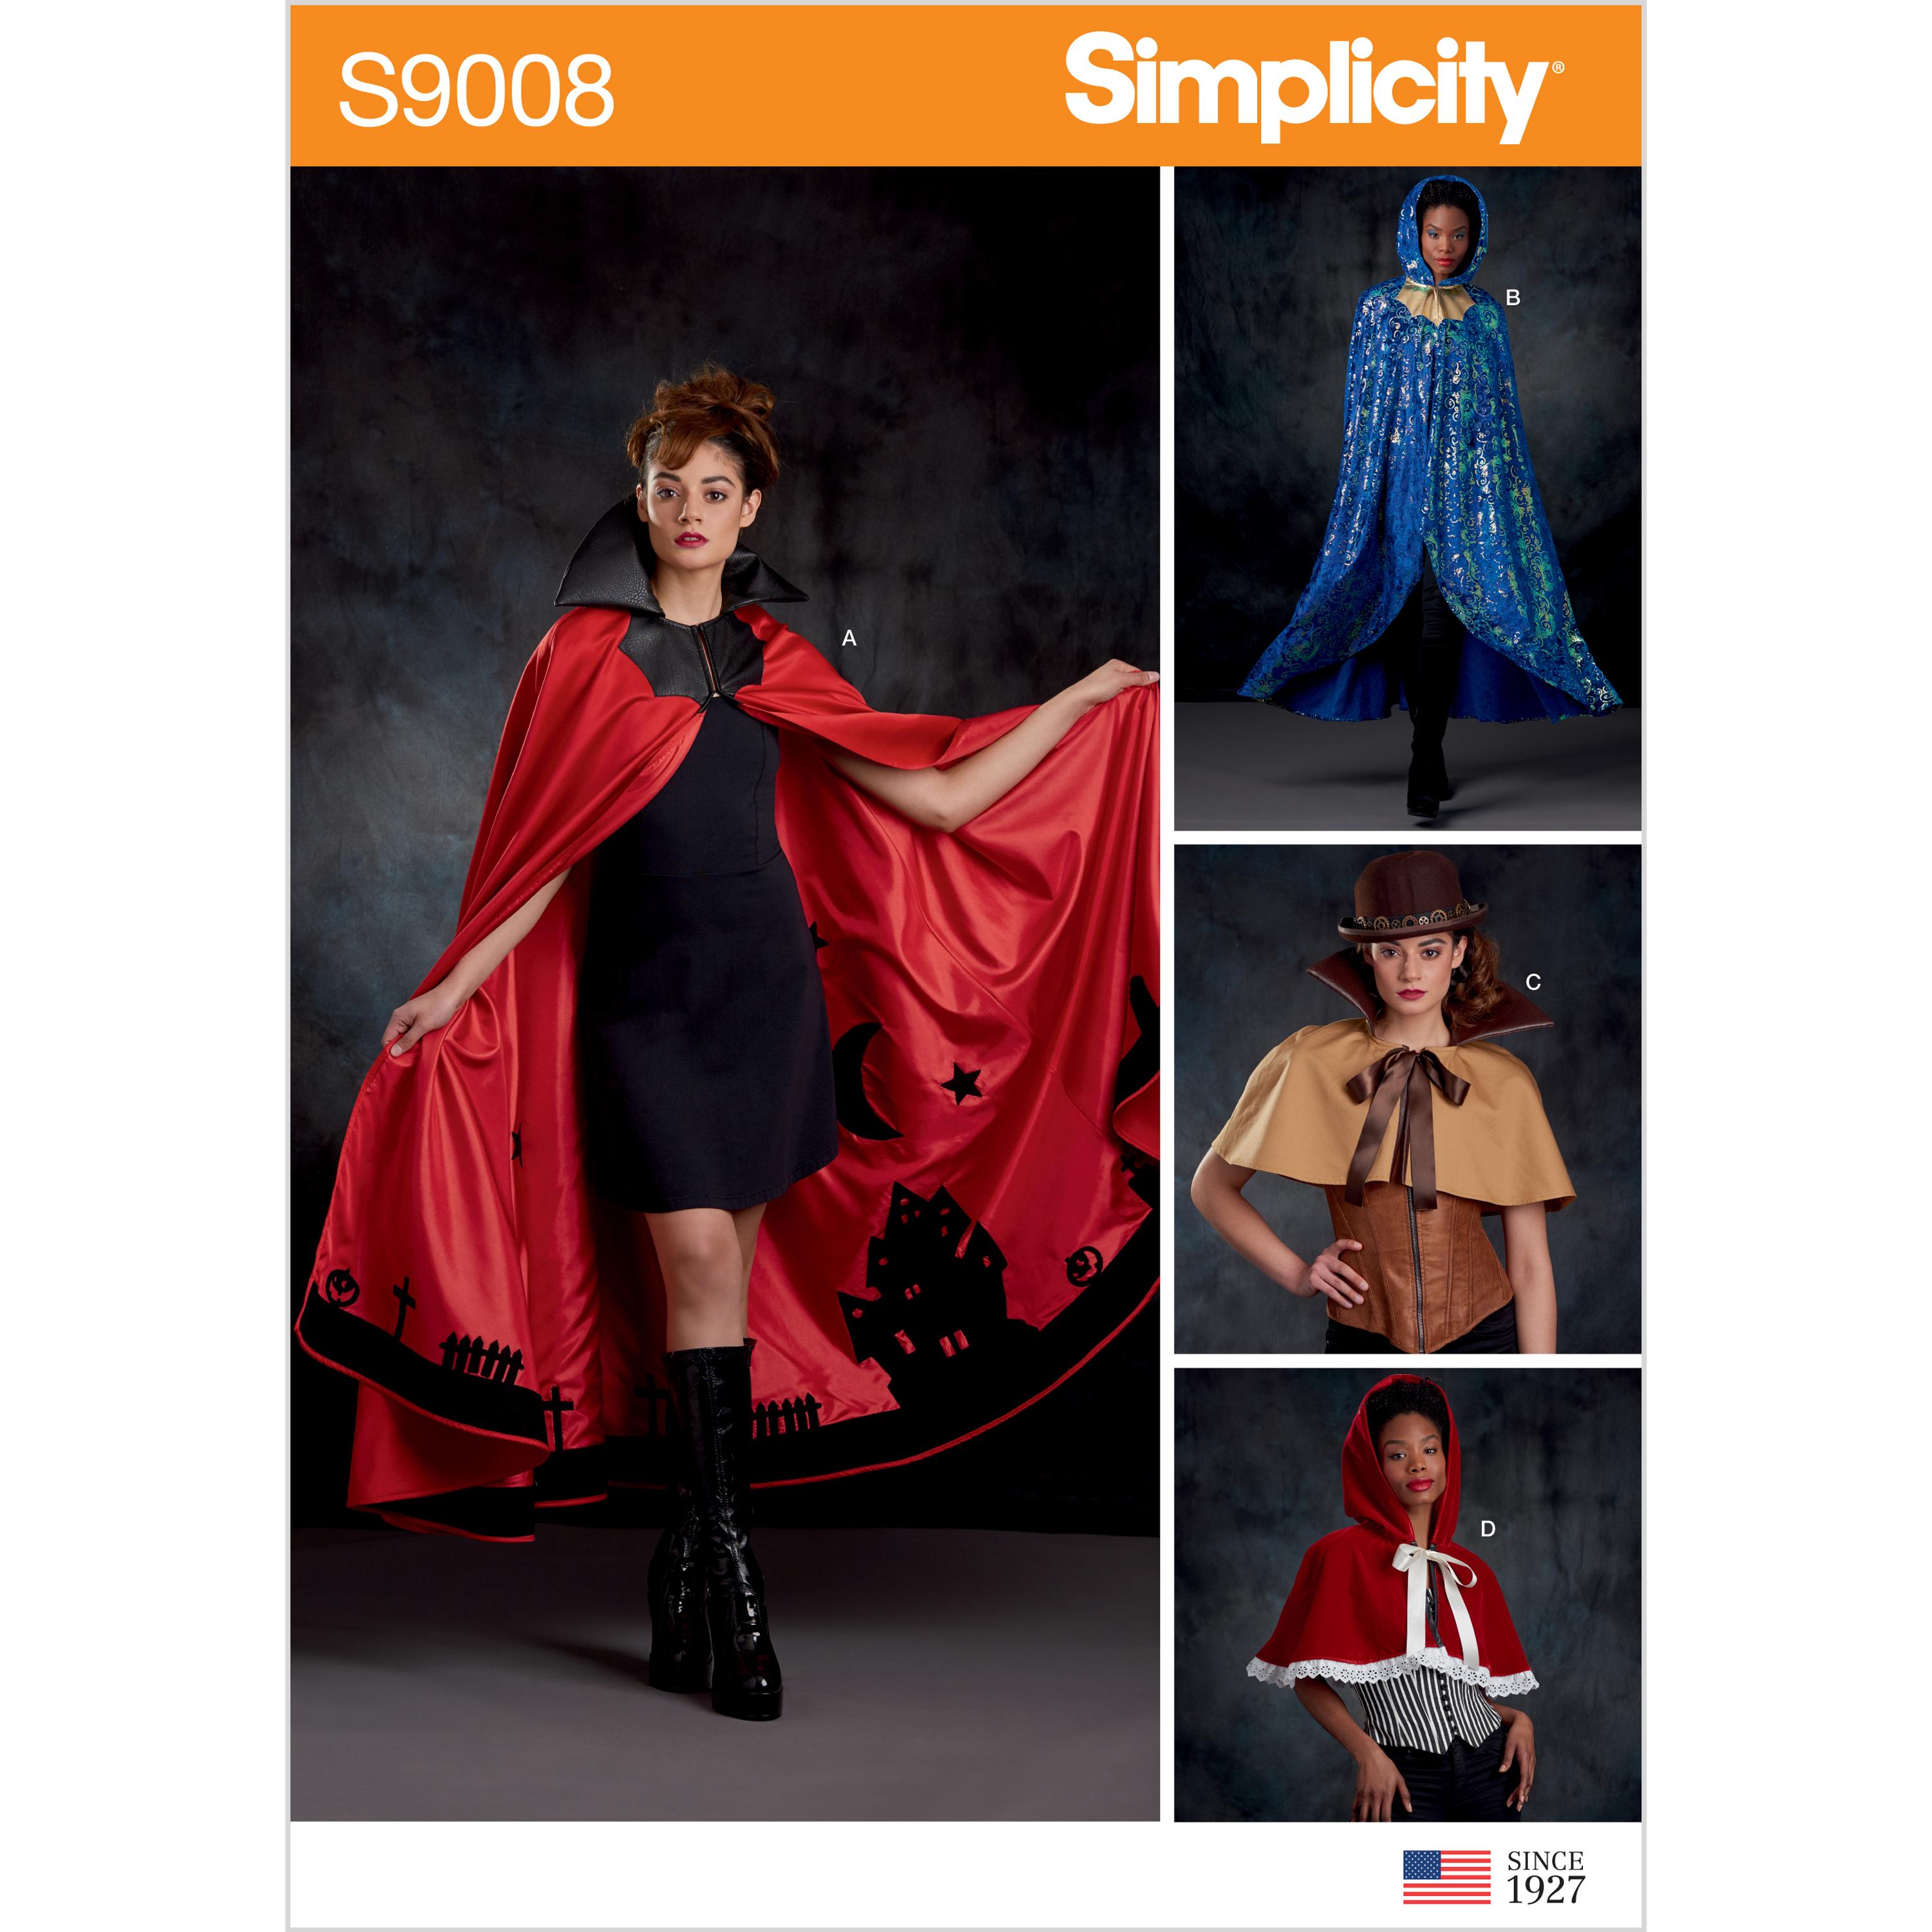 Simplicity S9008 Misses' Cape with Tie Costumes